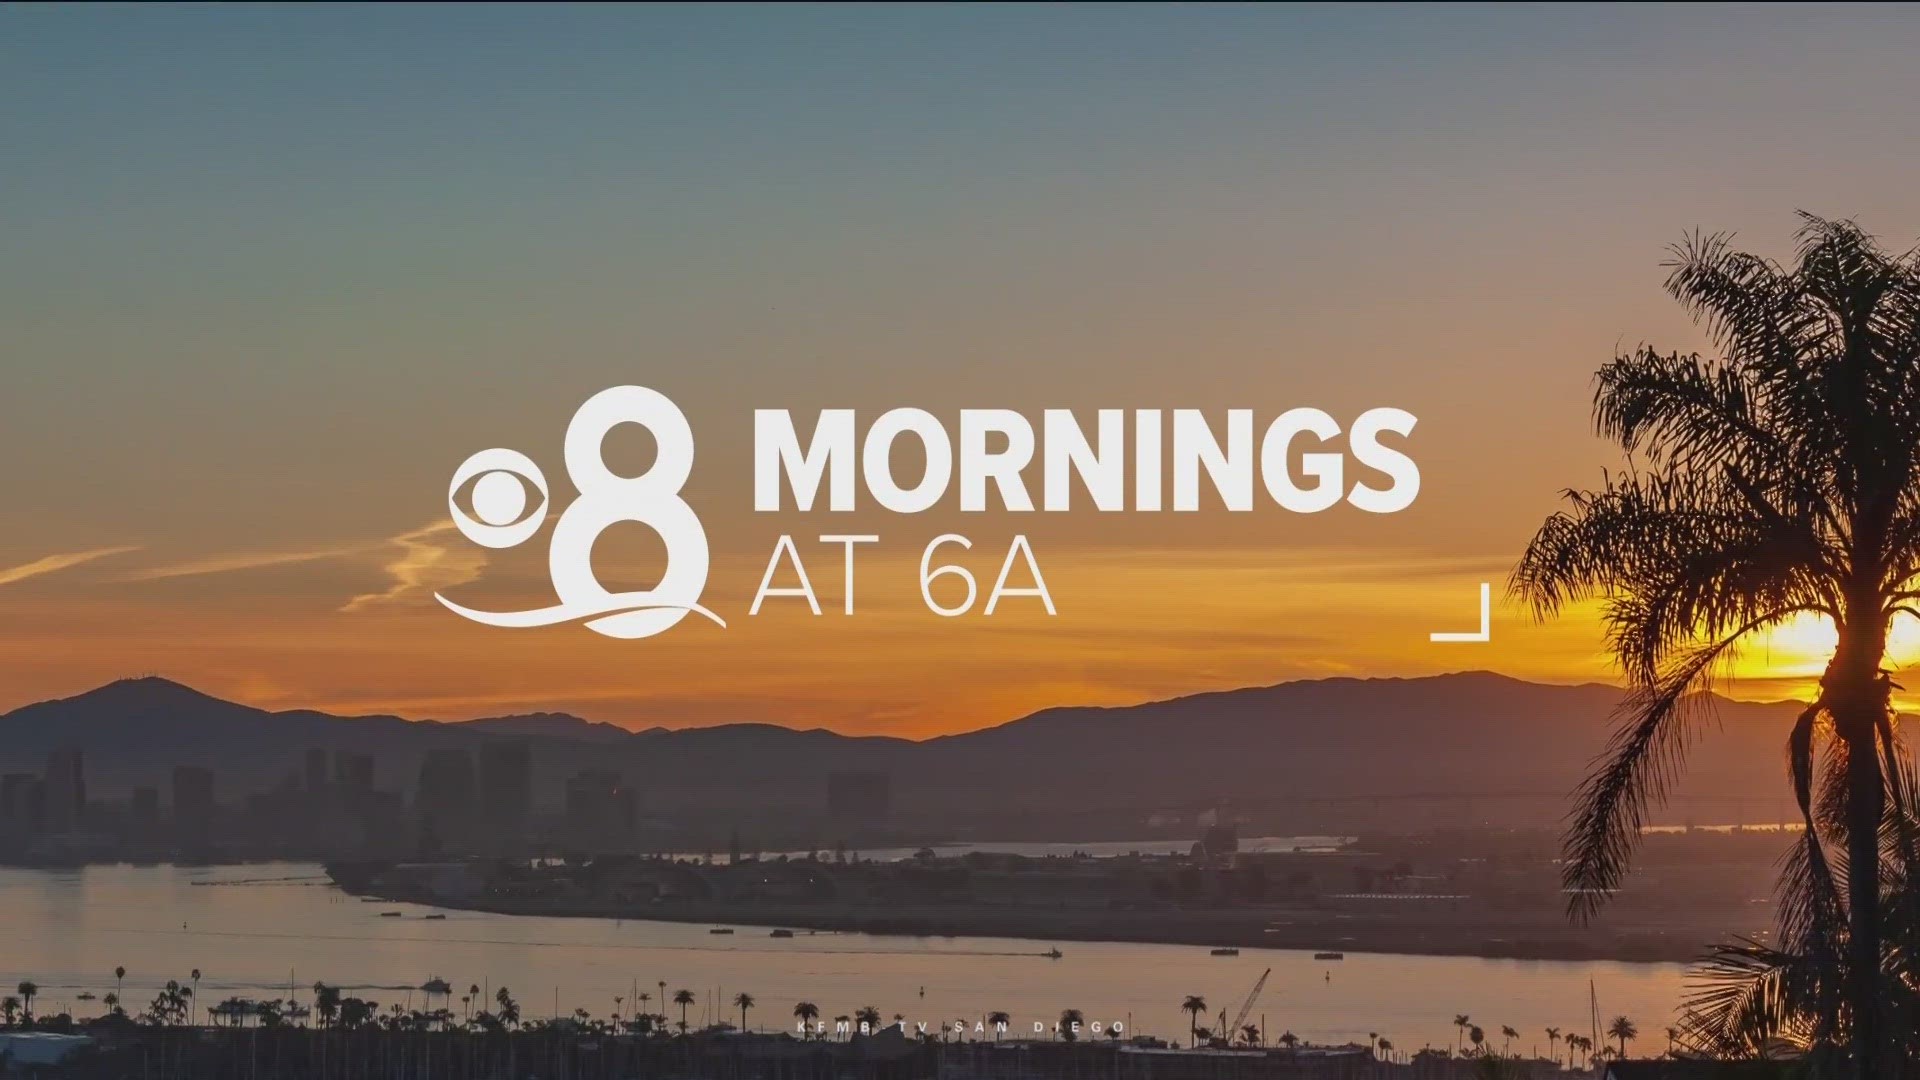 Today's top stories from CBS 8 San Diego on Thursday, January 4 at 6 a.m.